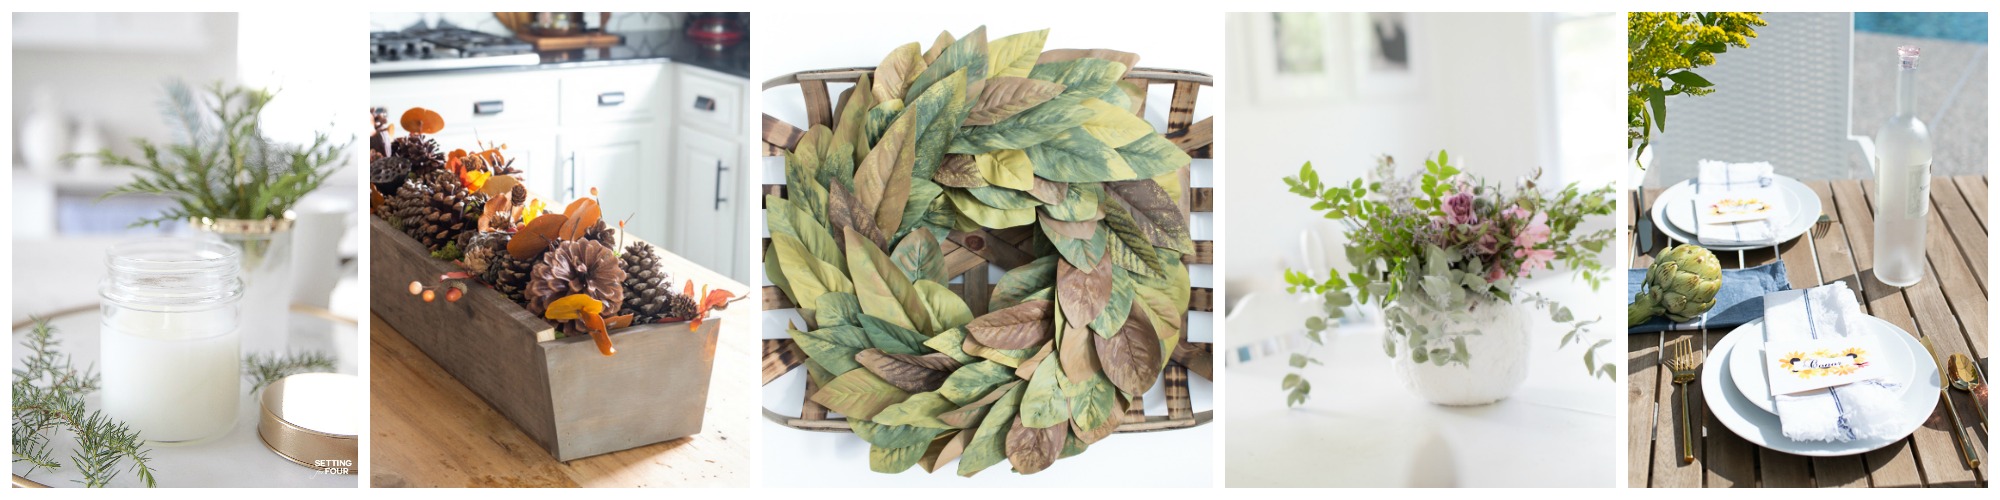 How to make a DIY acorn garland to decorate the mantel for Autumn